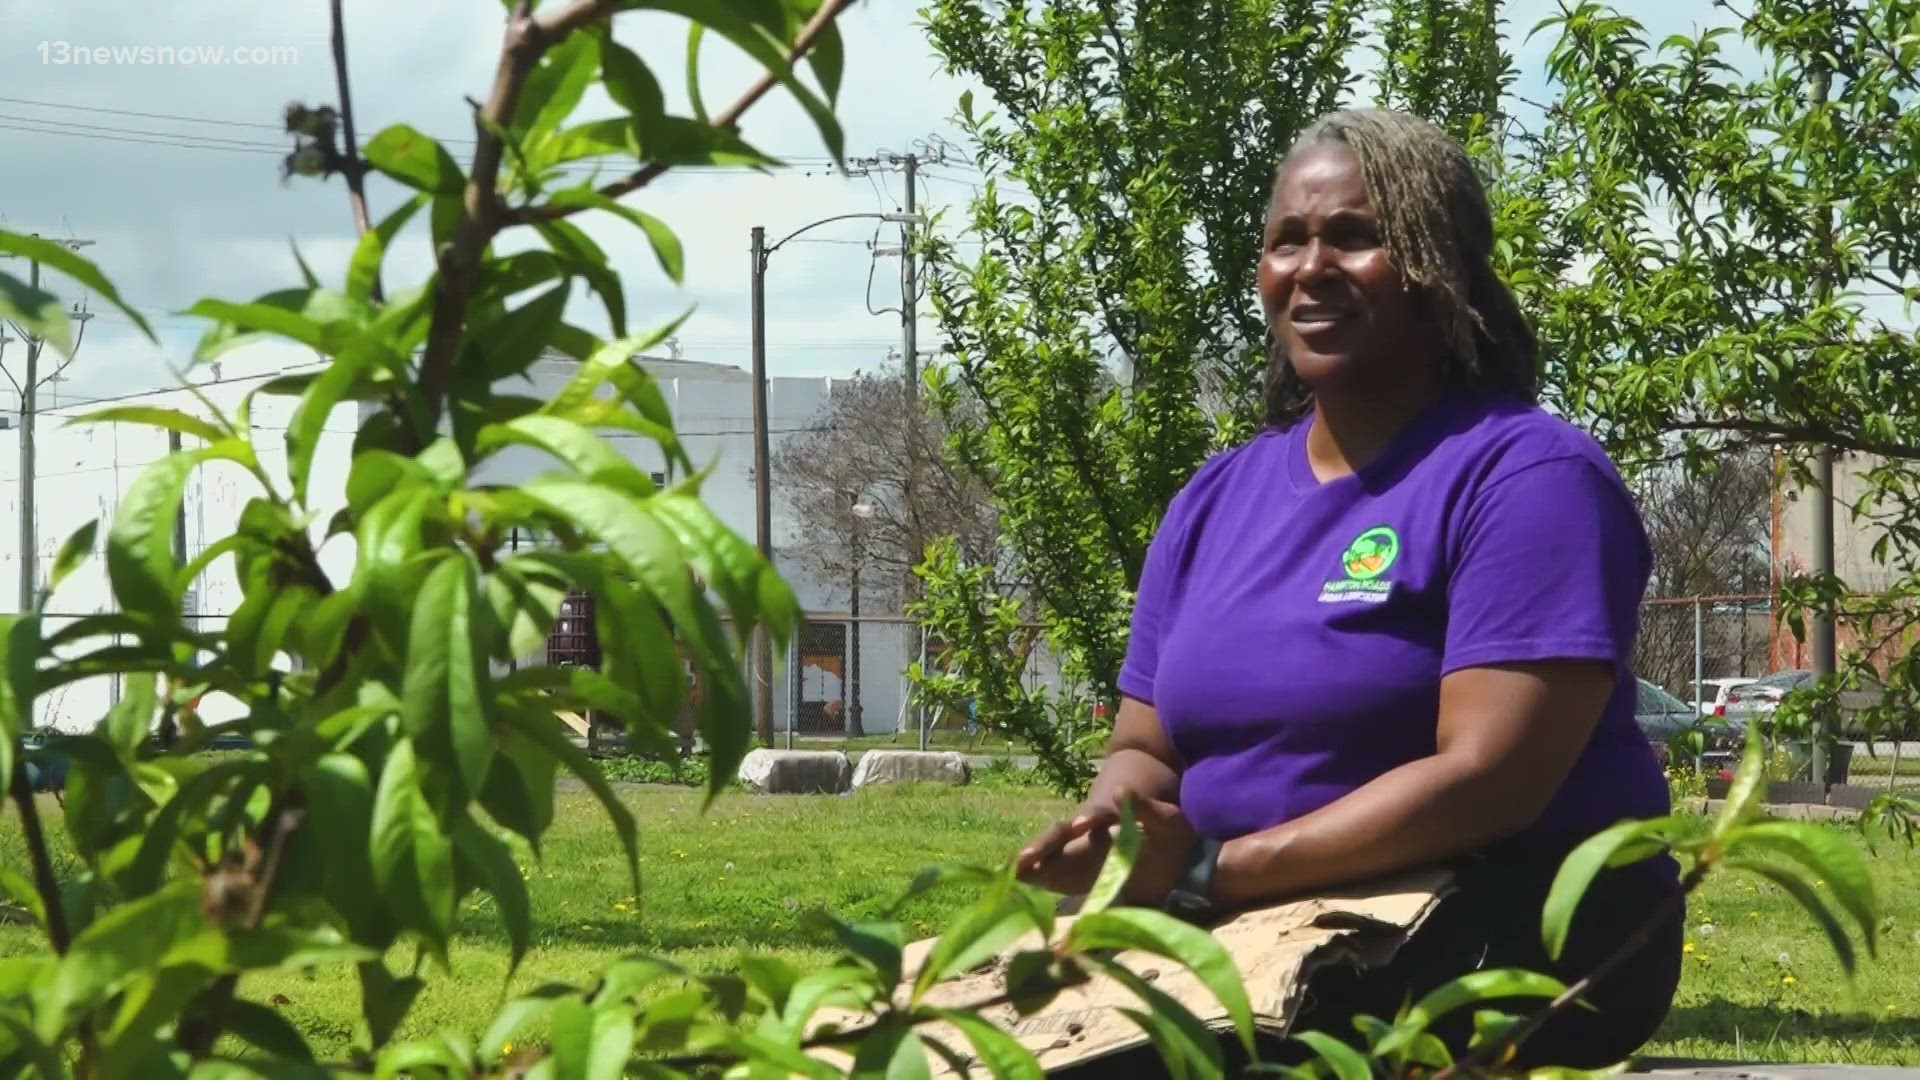 Micro-farming, otherwise known as "urban agriculture," is an effort to help neighborhoods where people struggle to find healthy and affordable food.